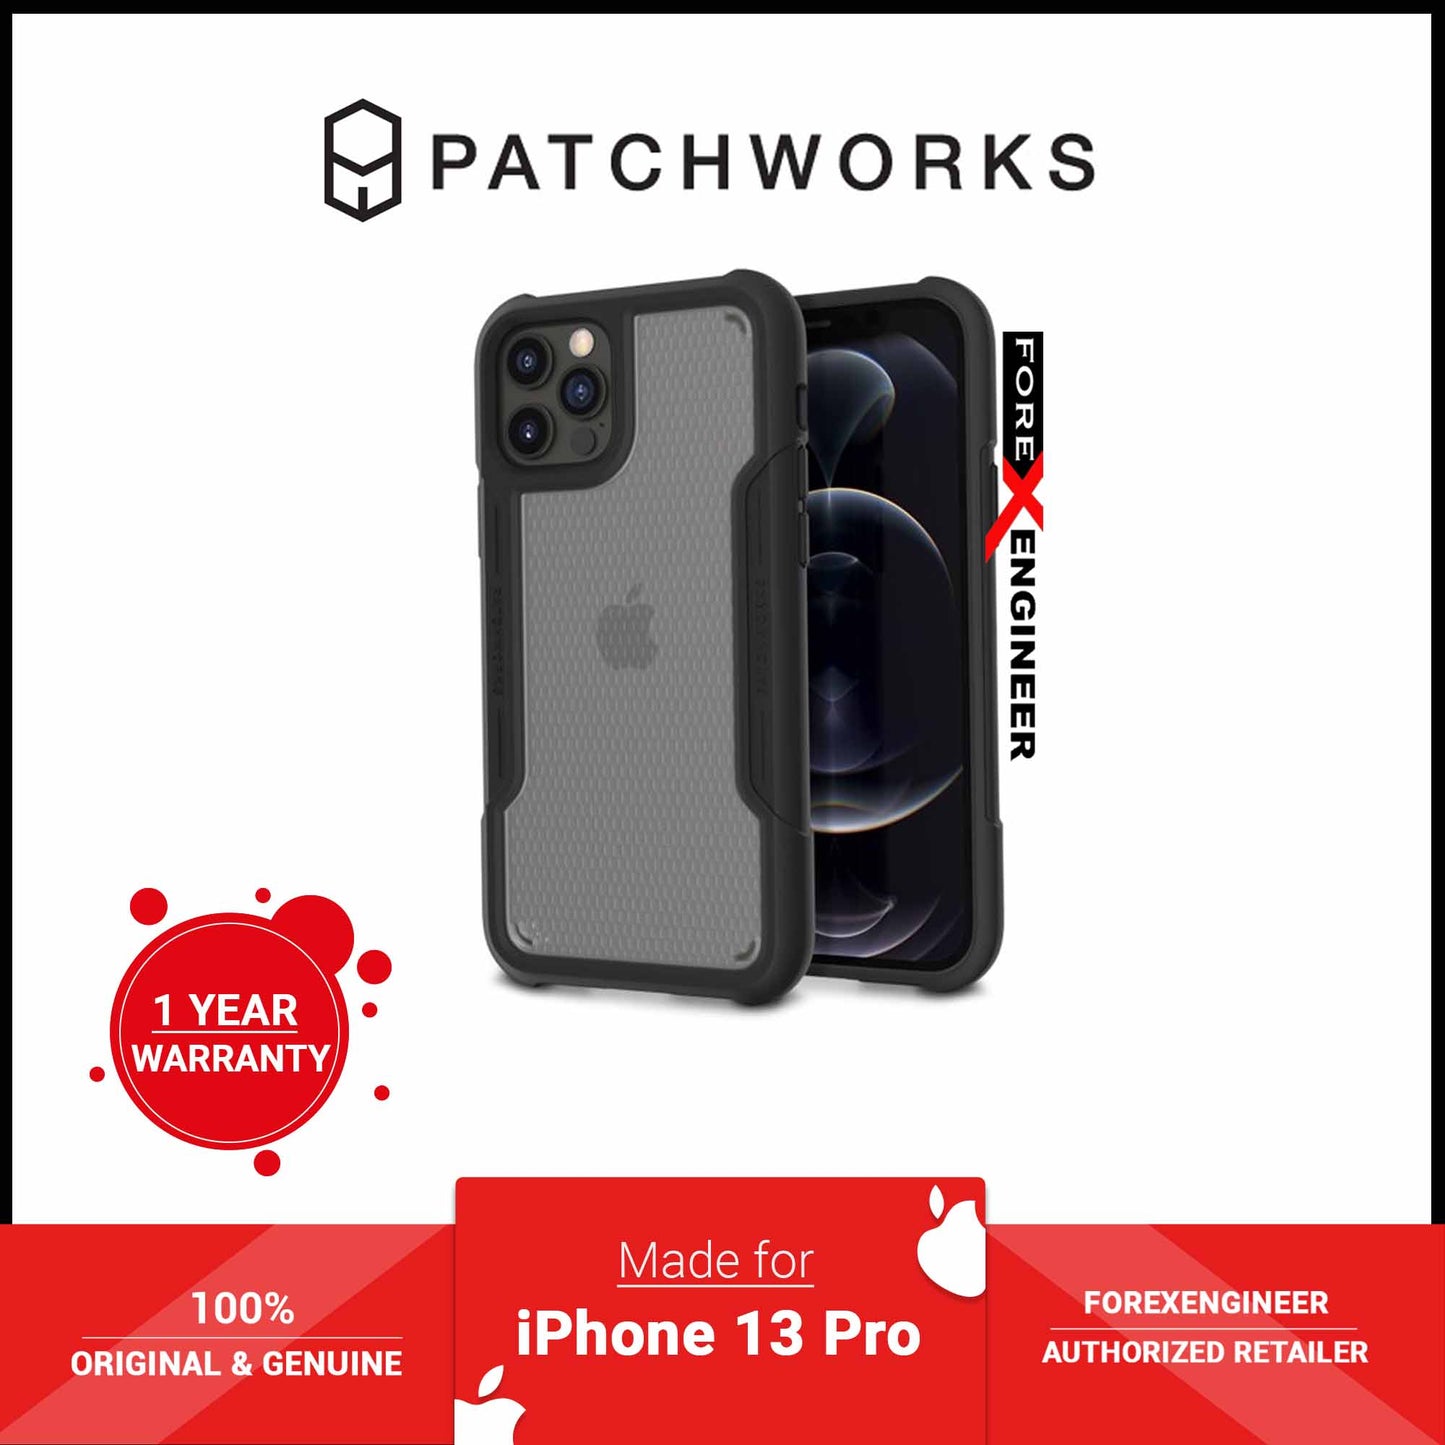 PATCHWORKS Solid for iPhone 13 Pro 6.1" 5G - Black (Barcode: 8809744958972 )